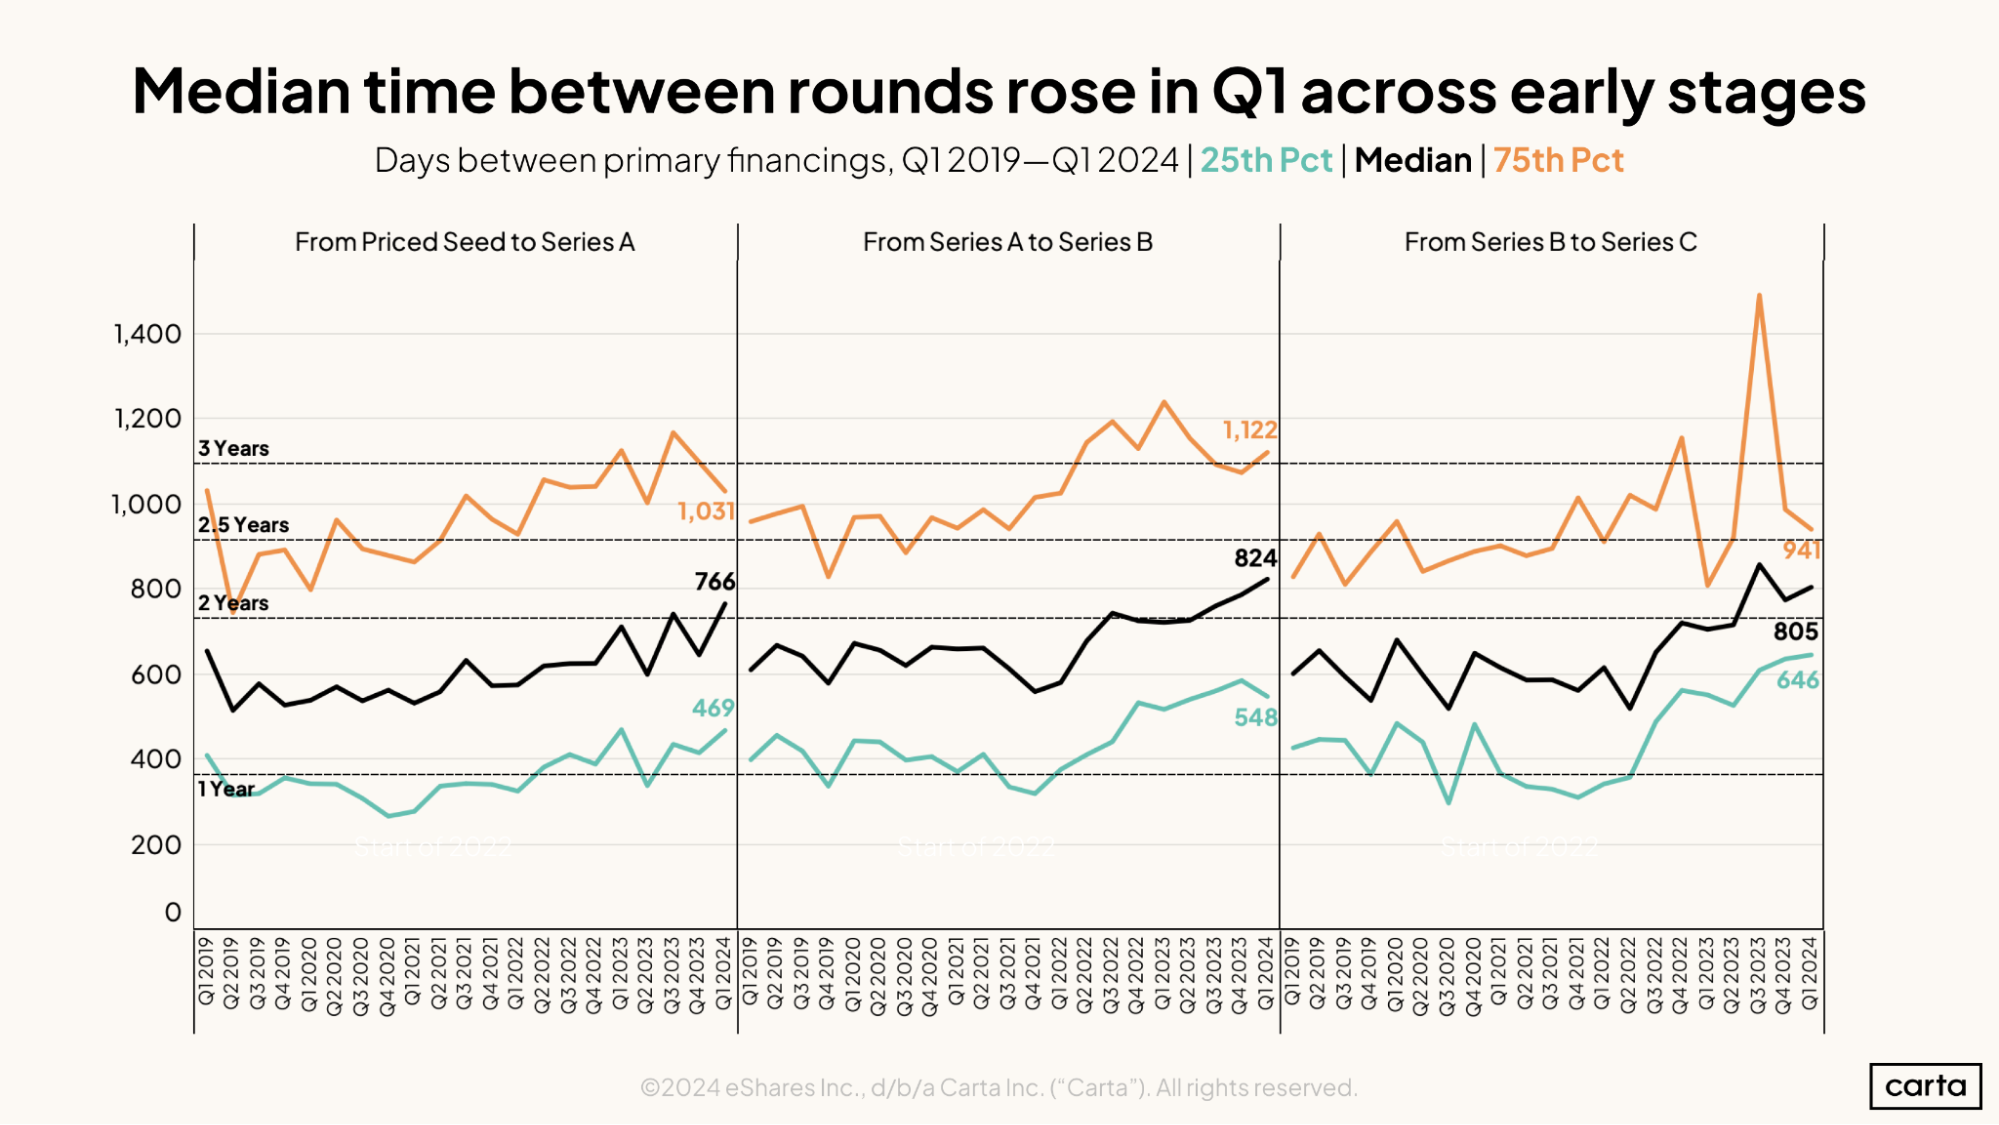 Median time between rounds rose in Q1 across early stages